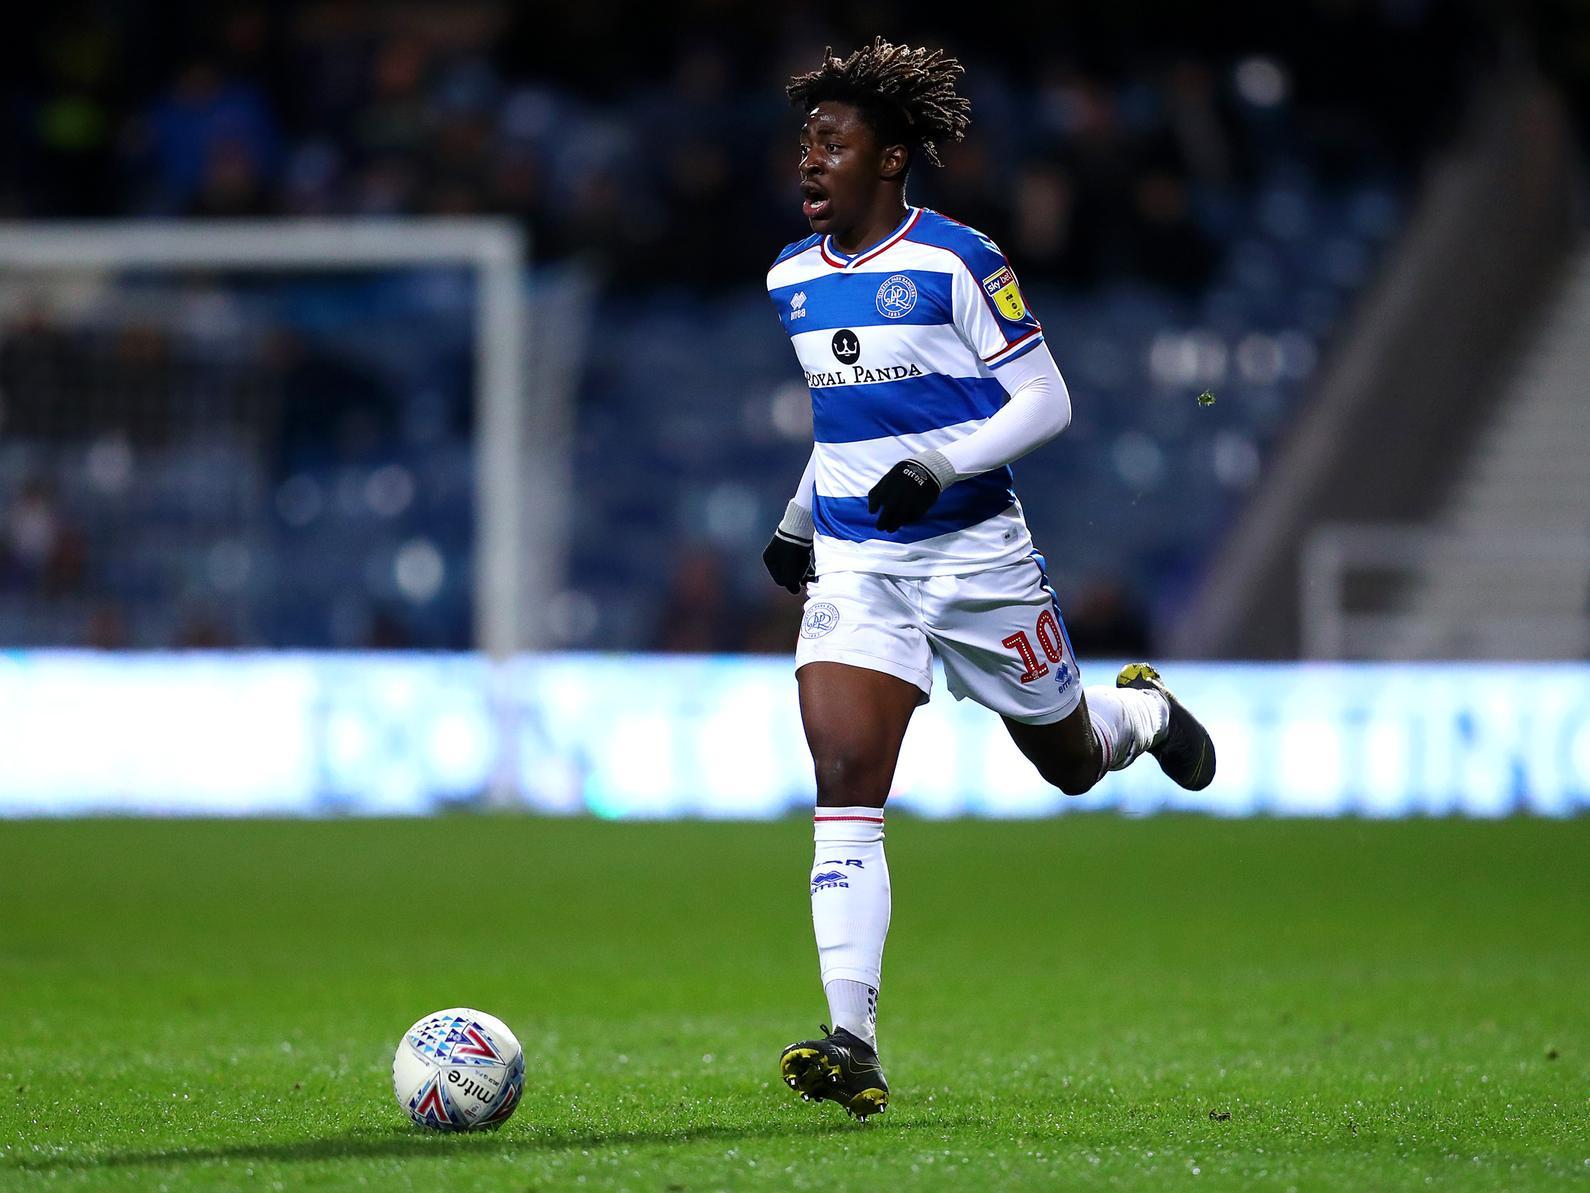 Eberechi Eze (QPR - midfield) - a number of dribbles that caught the eye in LS11 and was the Rs real dangerman on the day.